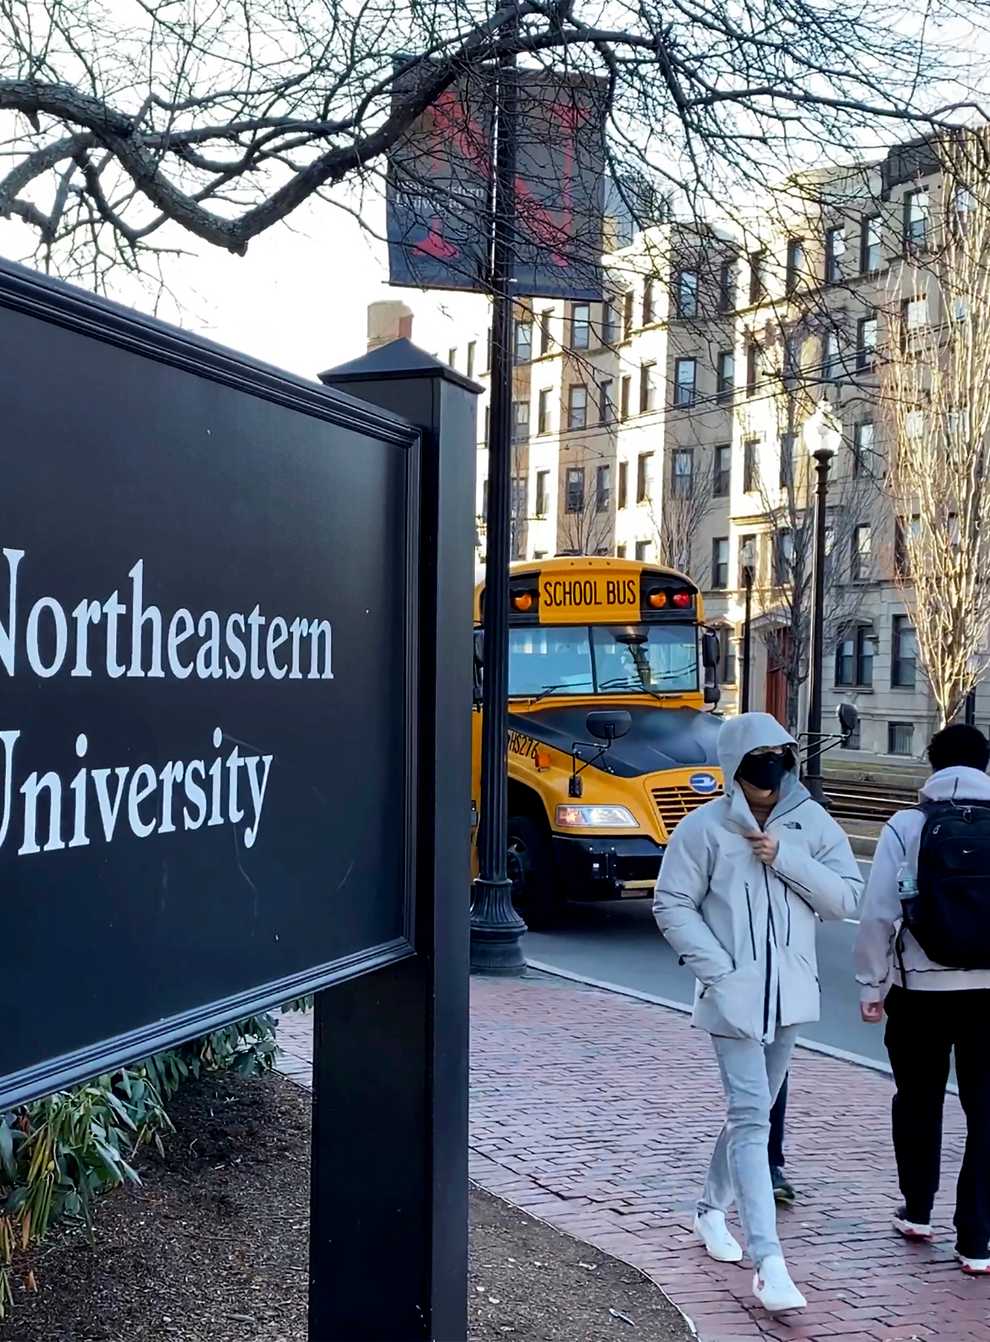 Students walk on the Northeastern University campus in Boston (Rodrique Ngowi/AP)